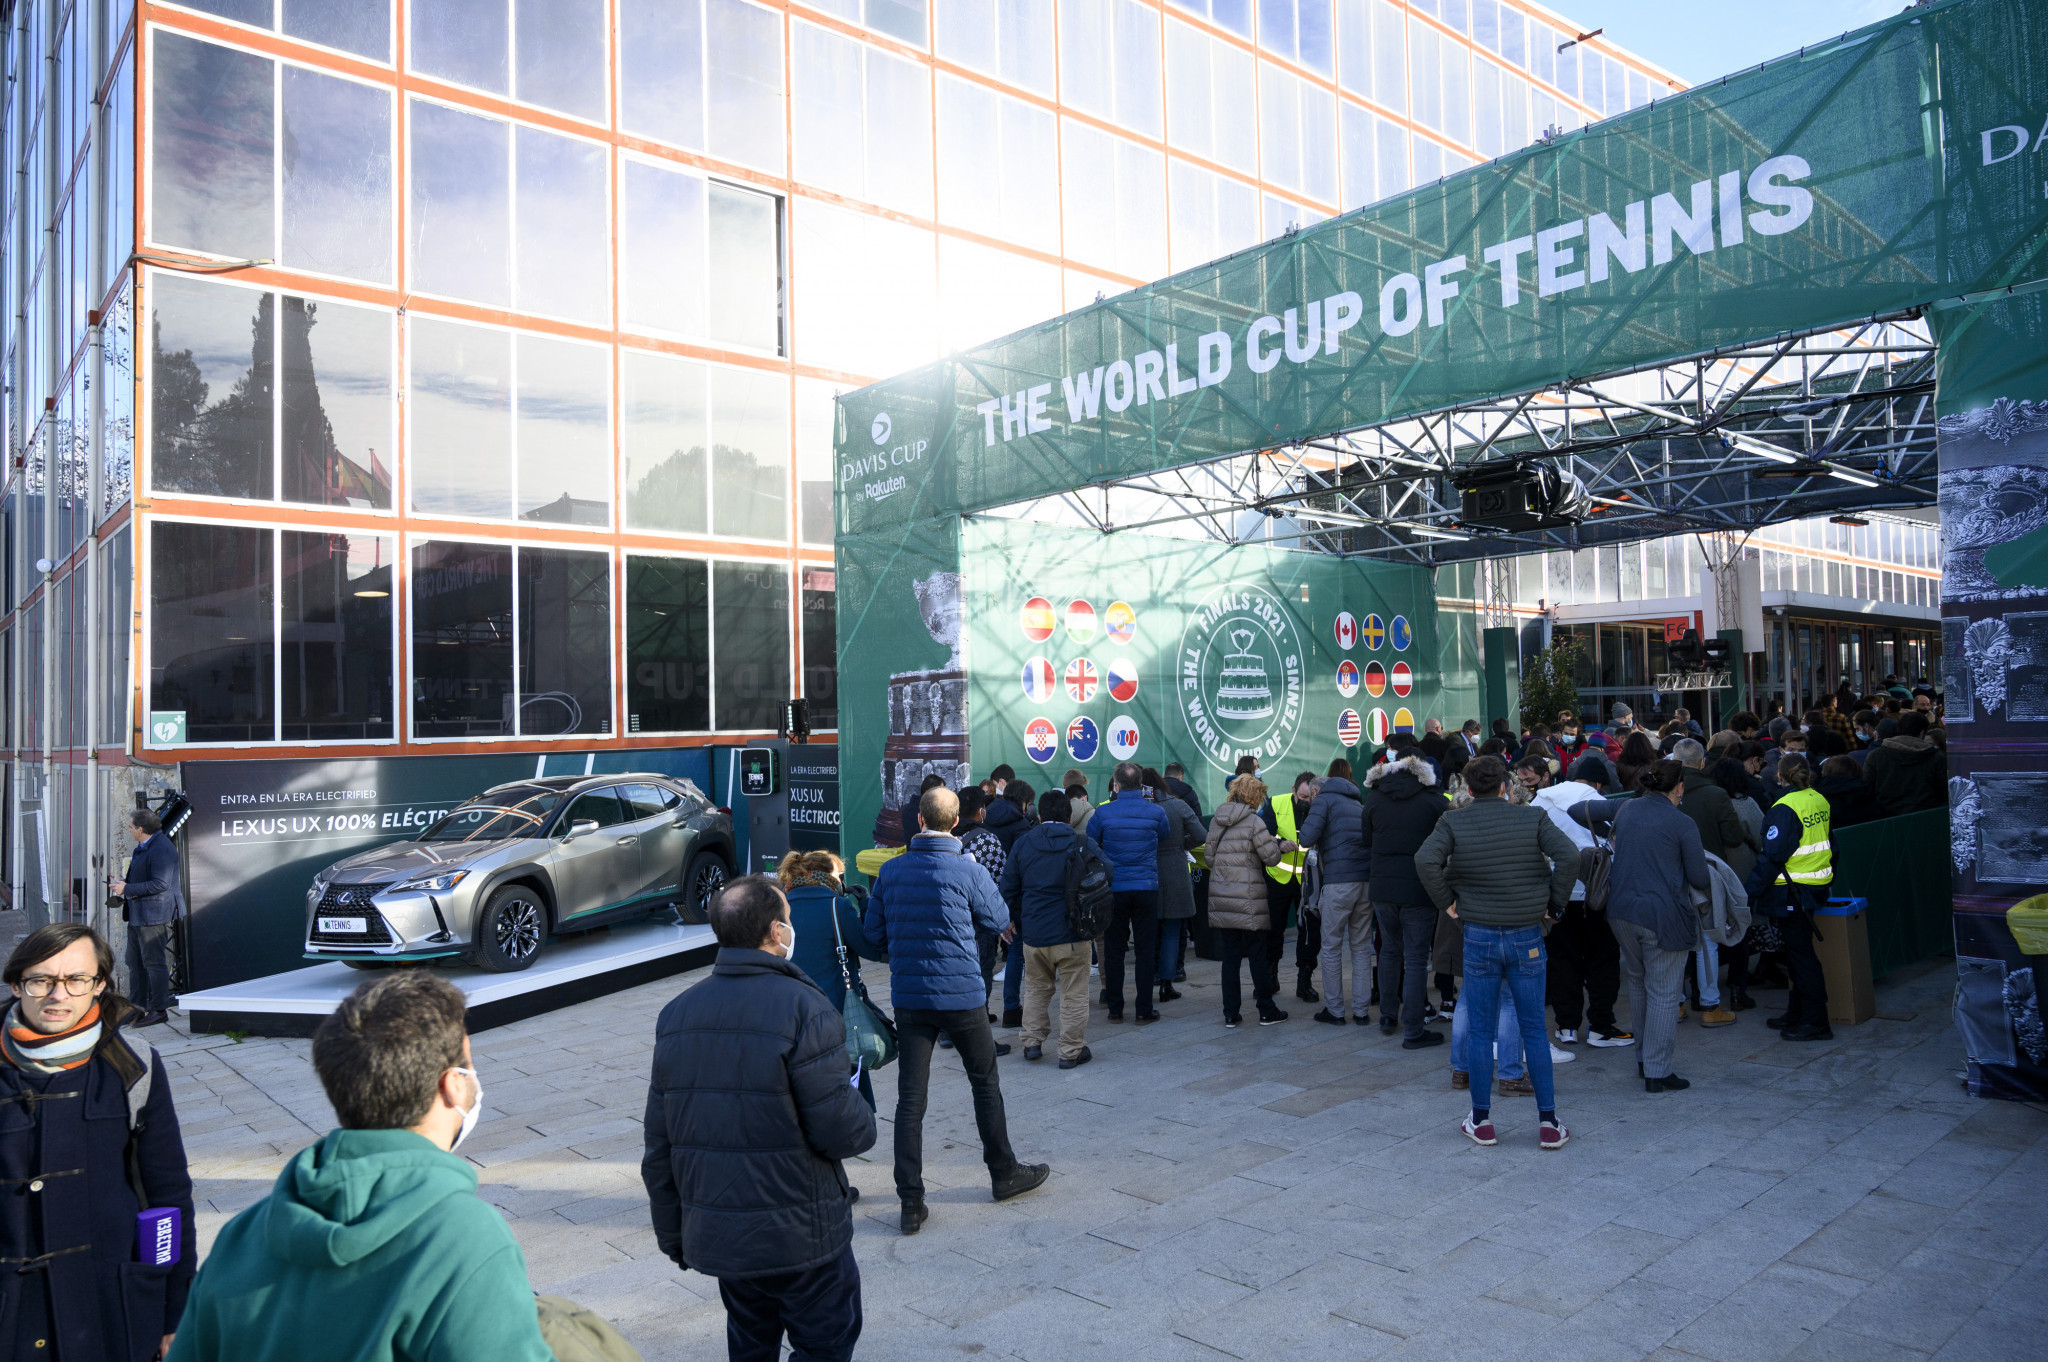 Bologna, Glasgow, Hamburg and Malaga have been announced as host venues for the Davis Cup Tennis Finals ©Getty Images 